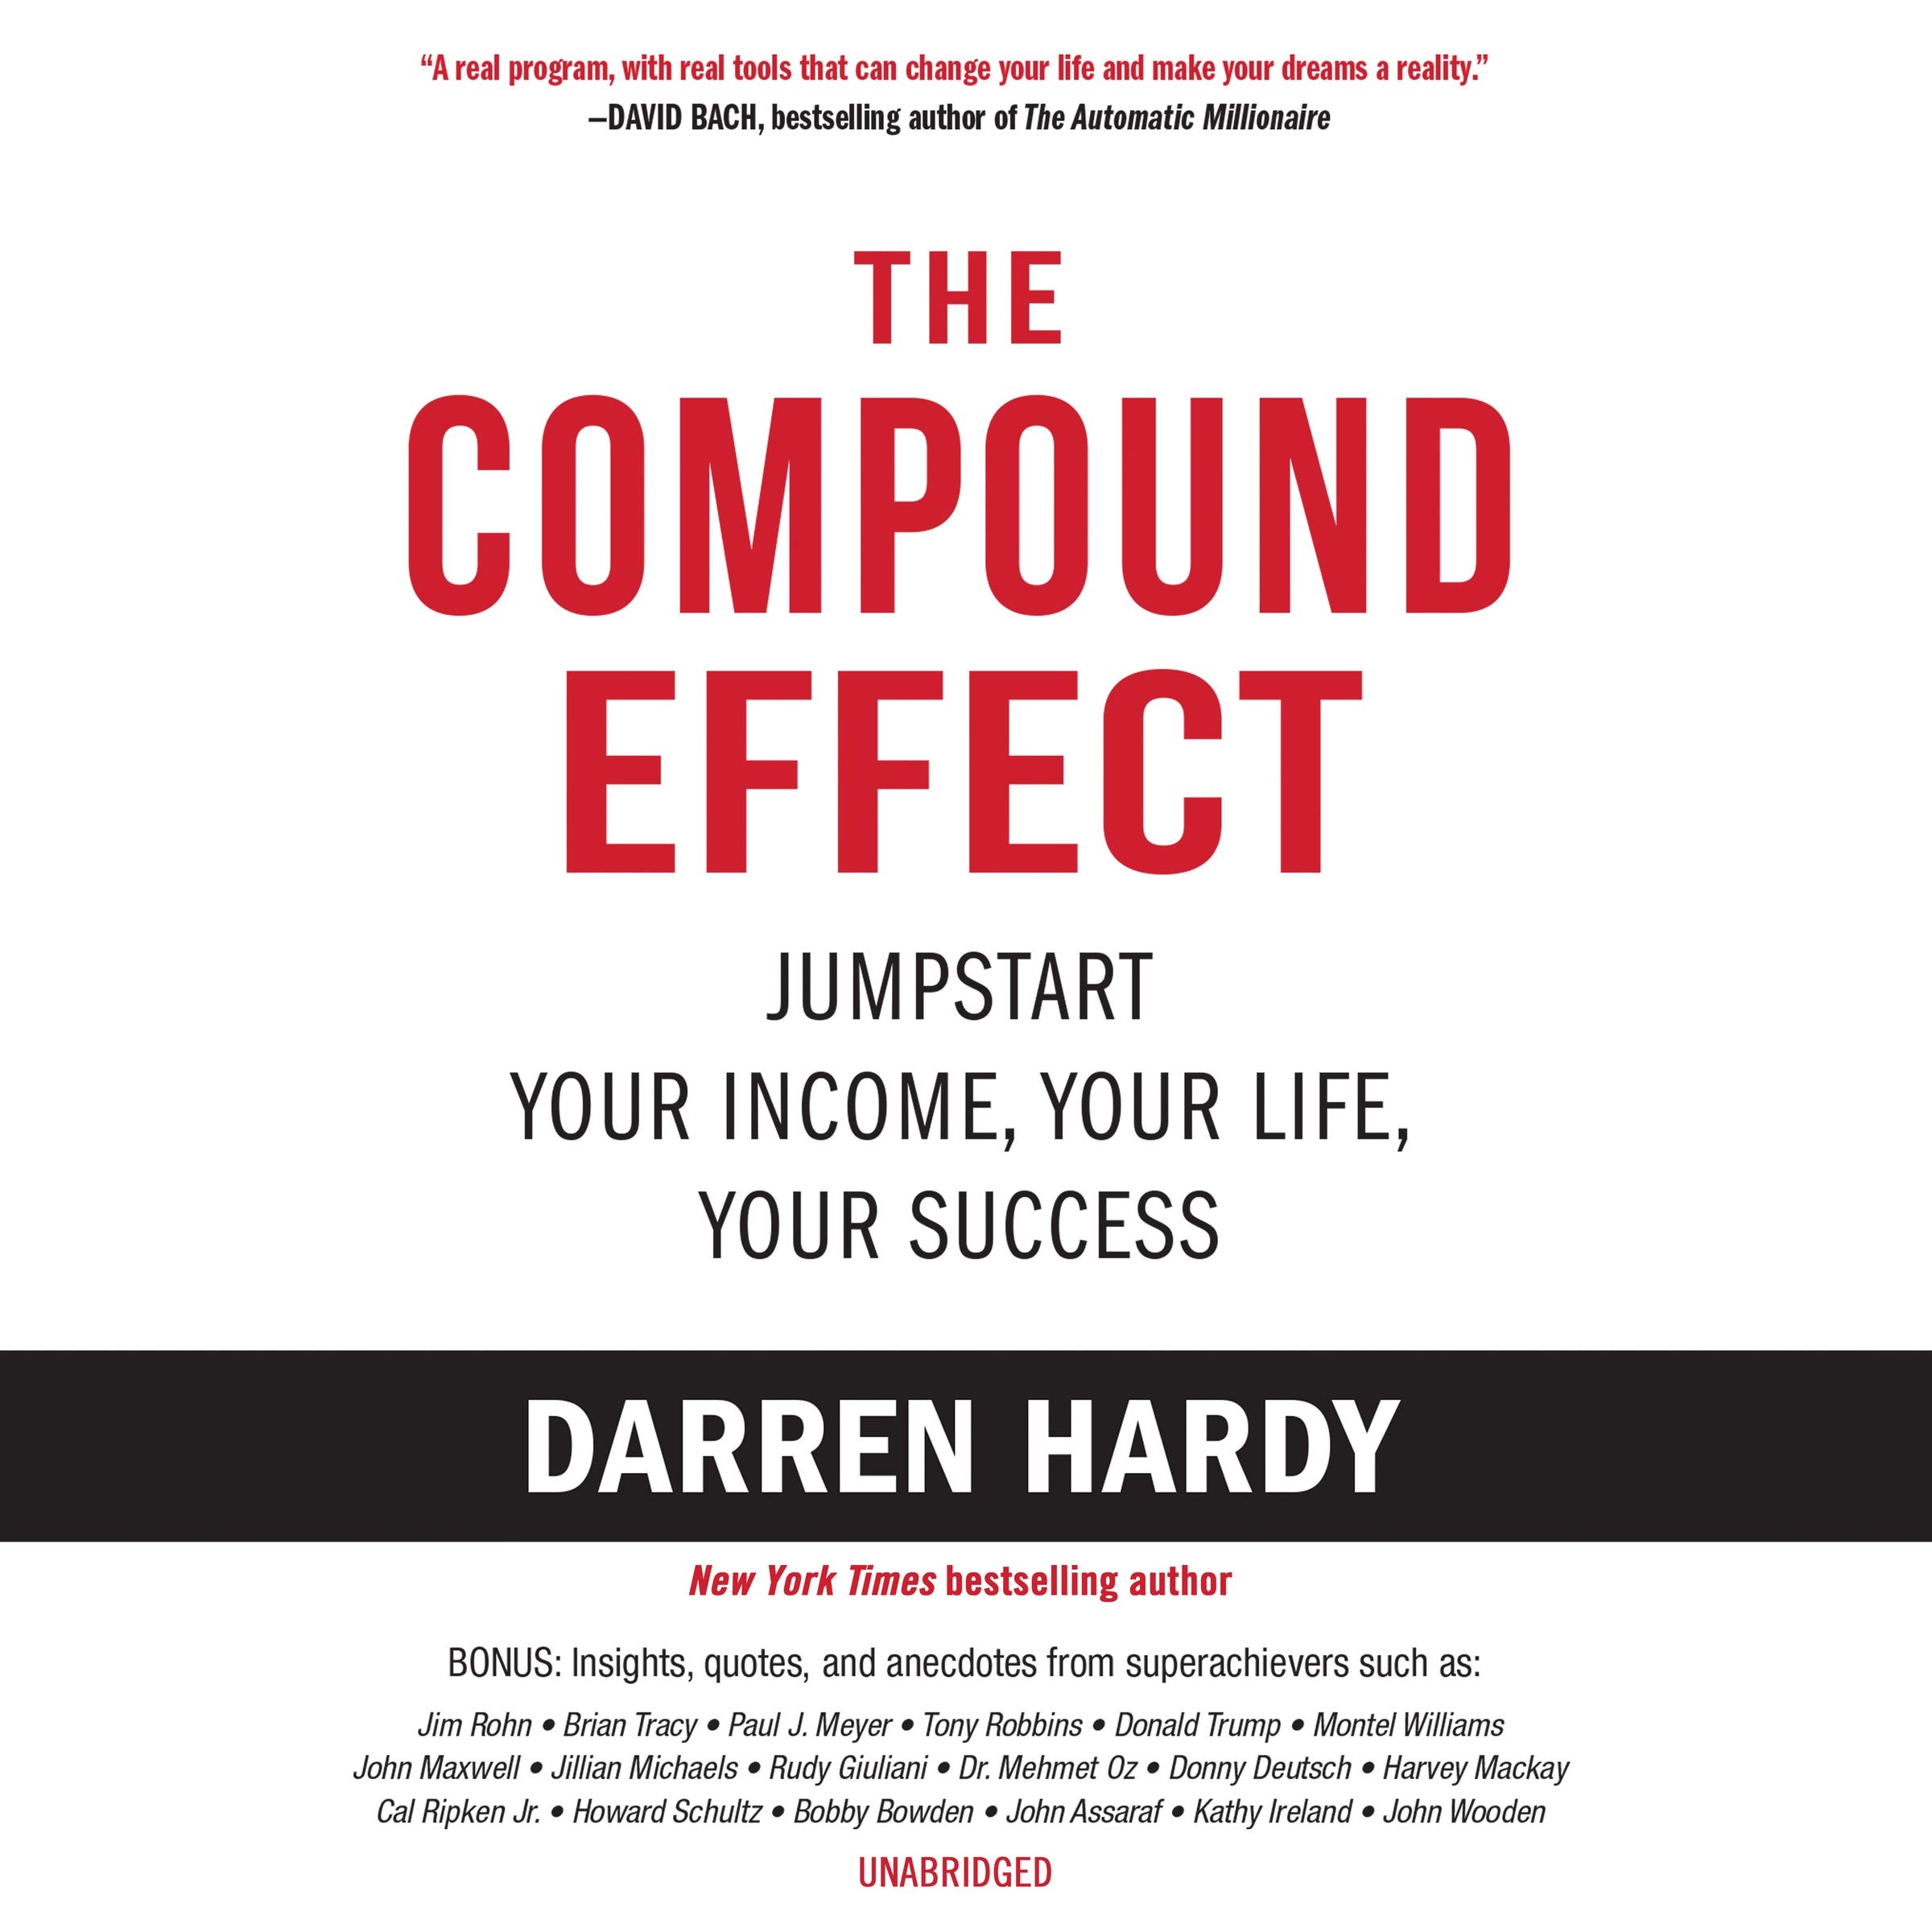 The compound effect by Darren Hardy